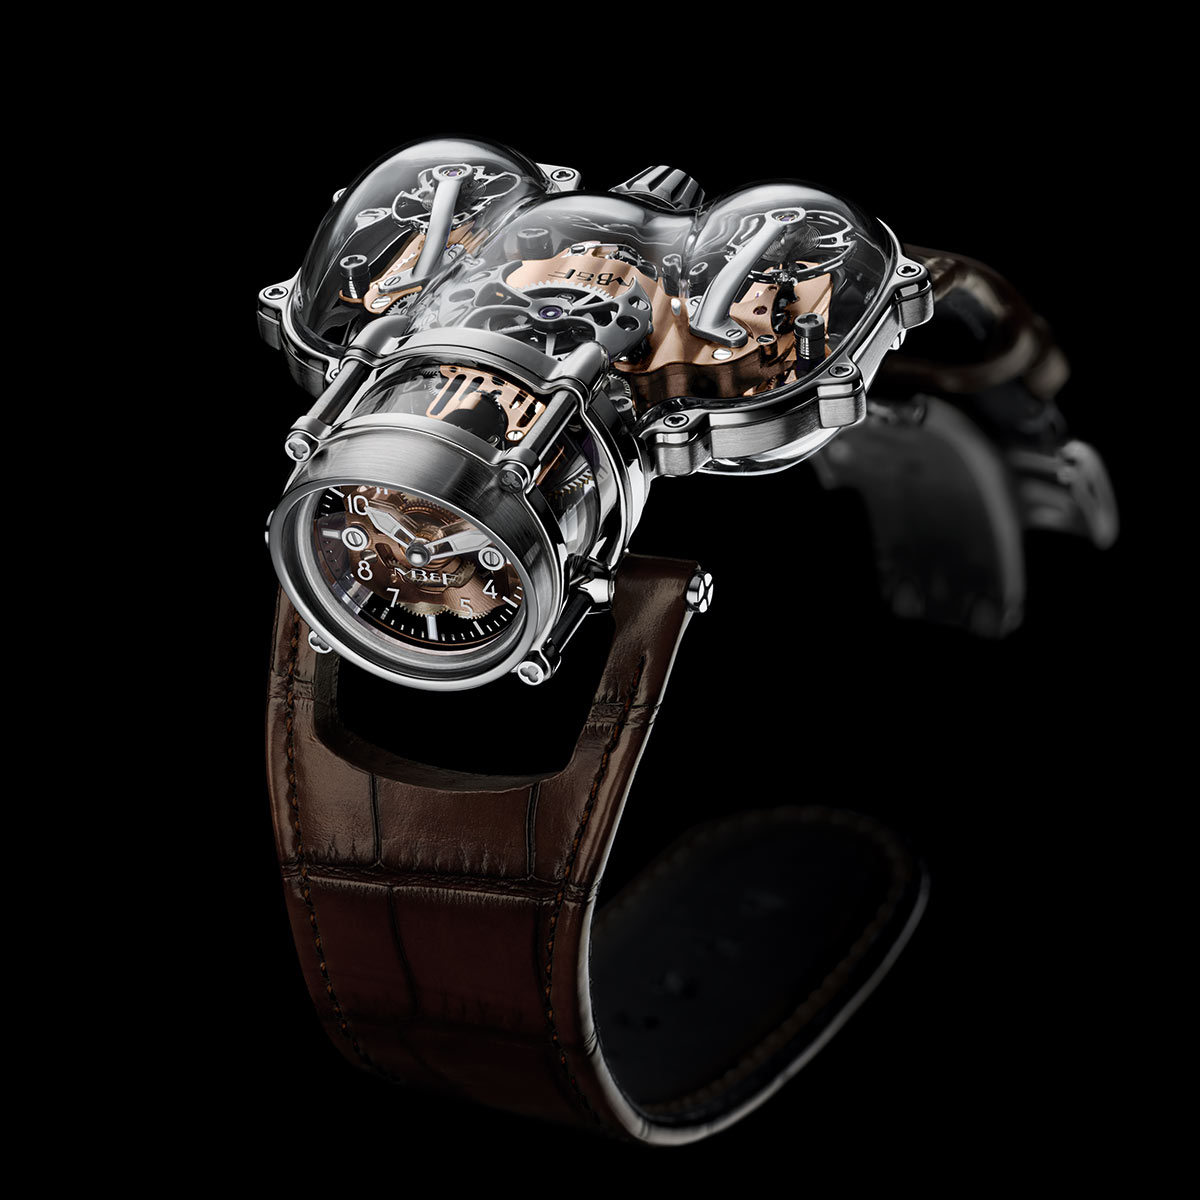 MB&F Horological Machine N°9 ‘Sapphire Vision’ Time and Watches